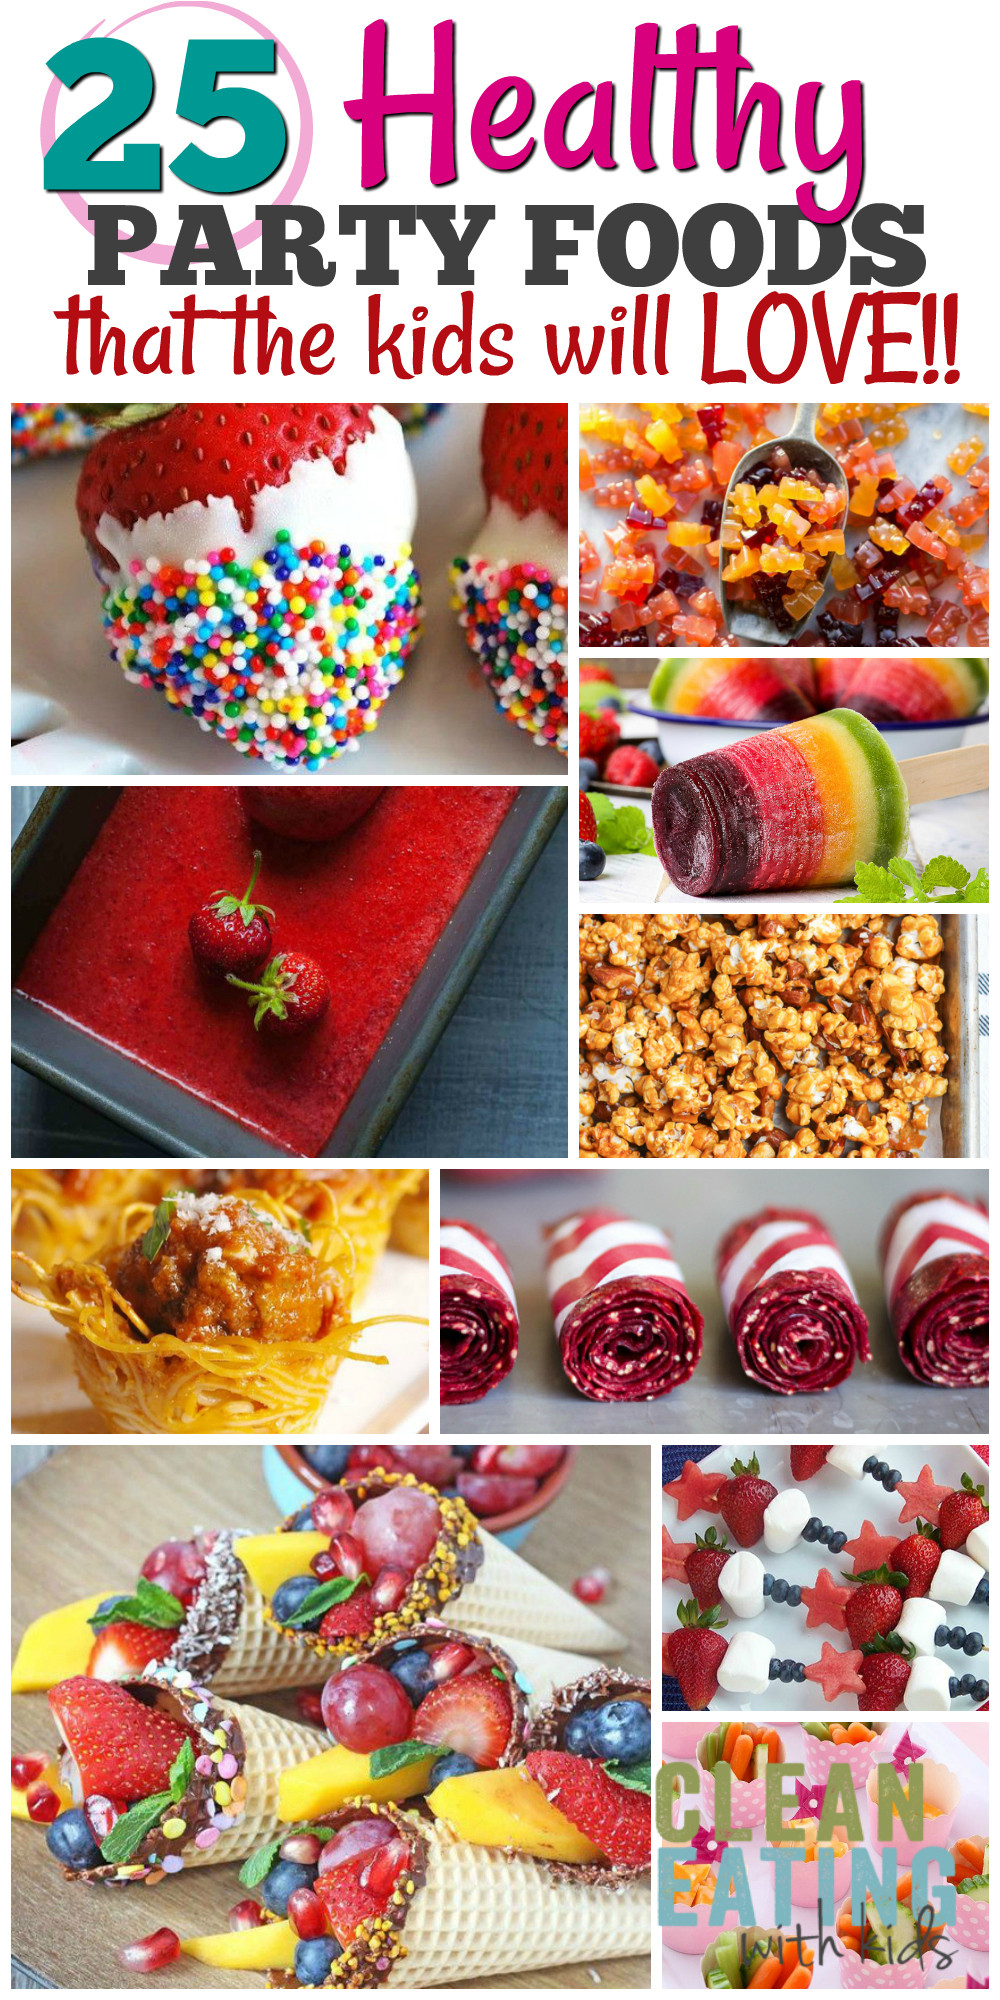 Birthday Party Meal Ideas
 25 Healthy Birthday Party Food Ideas Clean Eating with kids